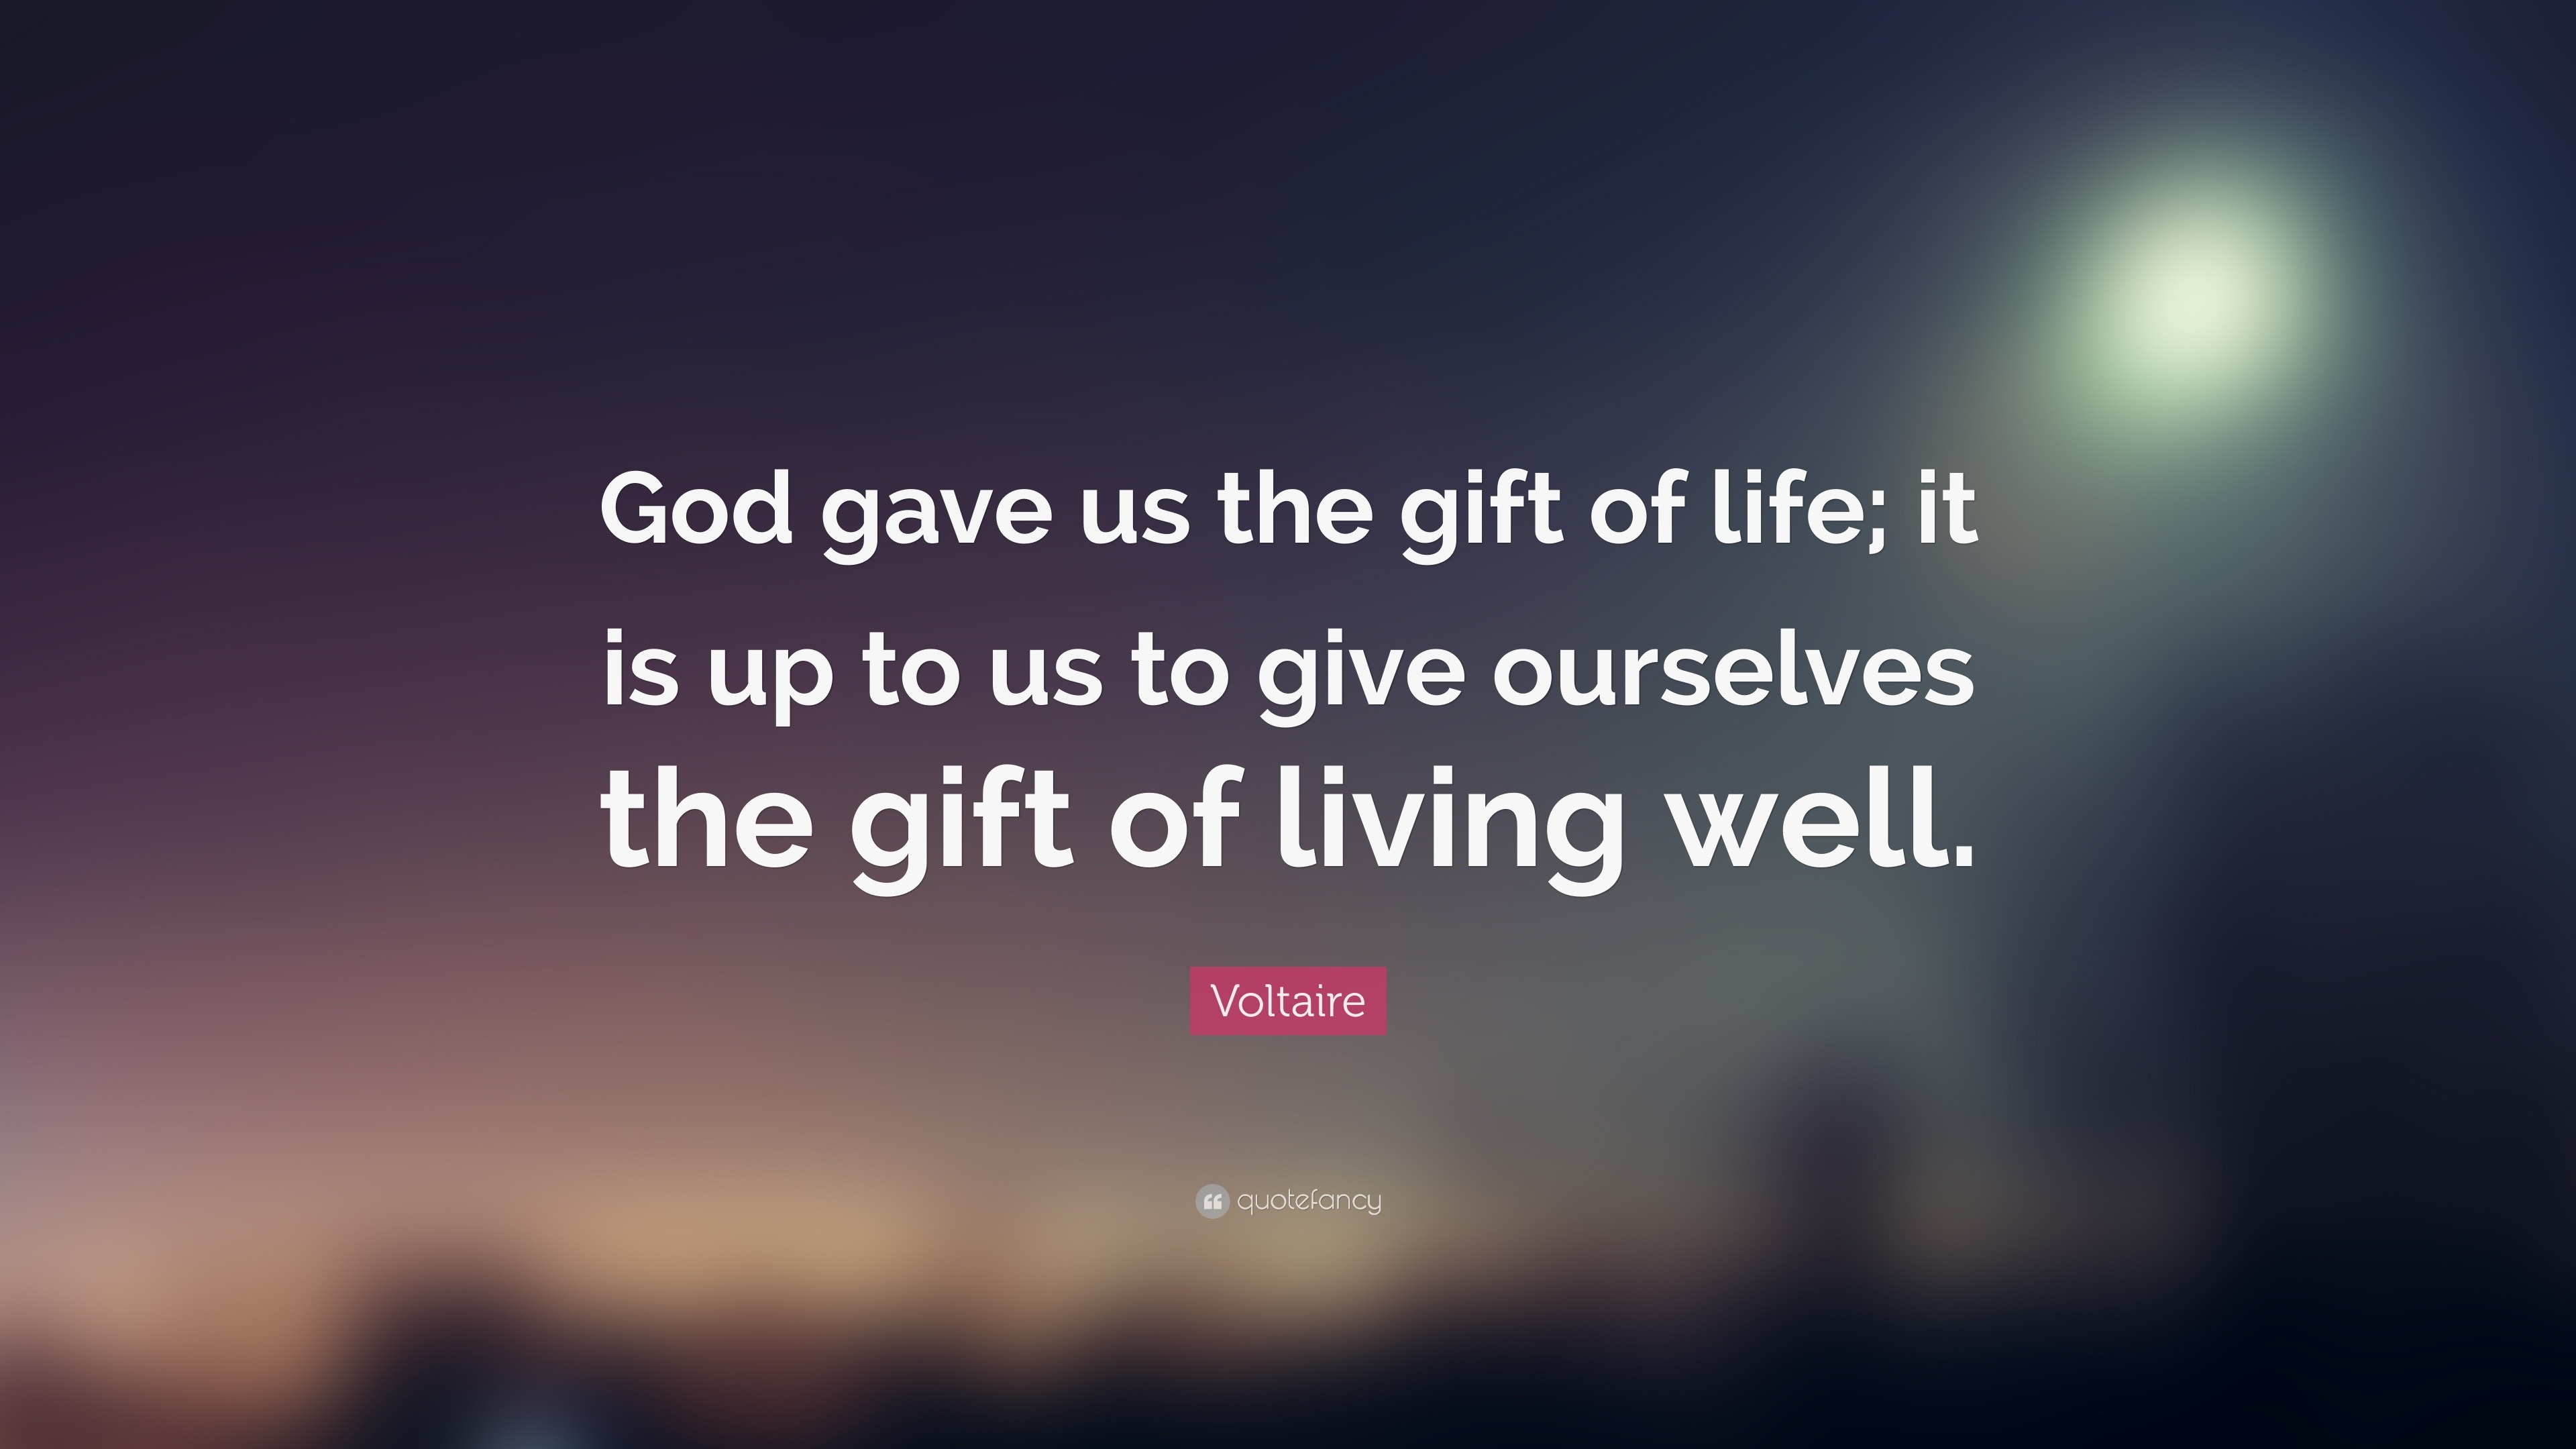 Voltaire Quote “God gave us the gift of life; it is up to us to give